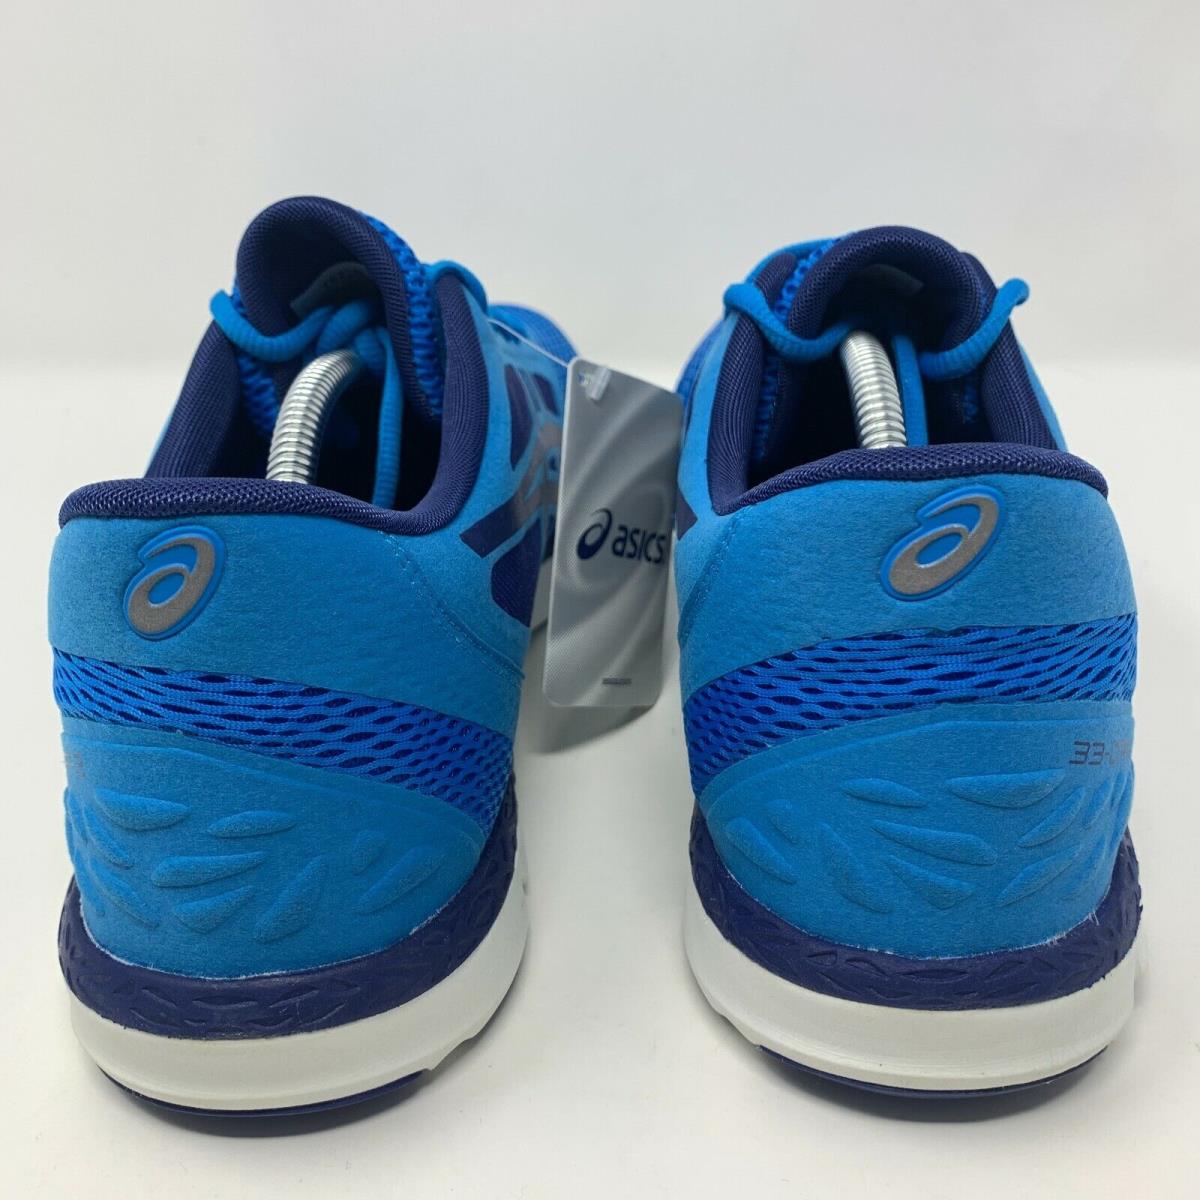 Asics 33 Running Shoes Mens Size 12.5 Blue Athletic Training Sneakers | 074663720803 - ASICS shoes - Blue | SporTipTop